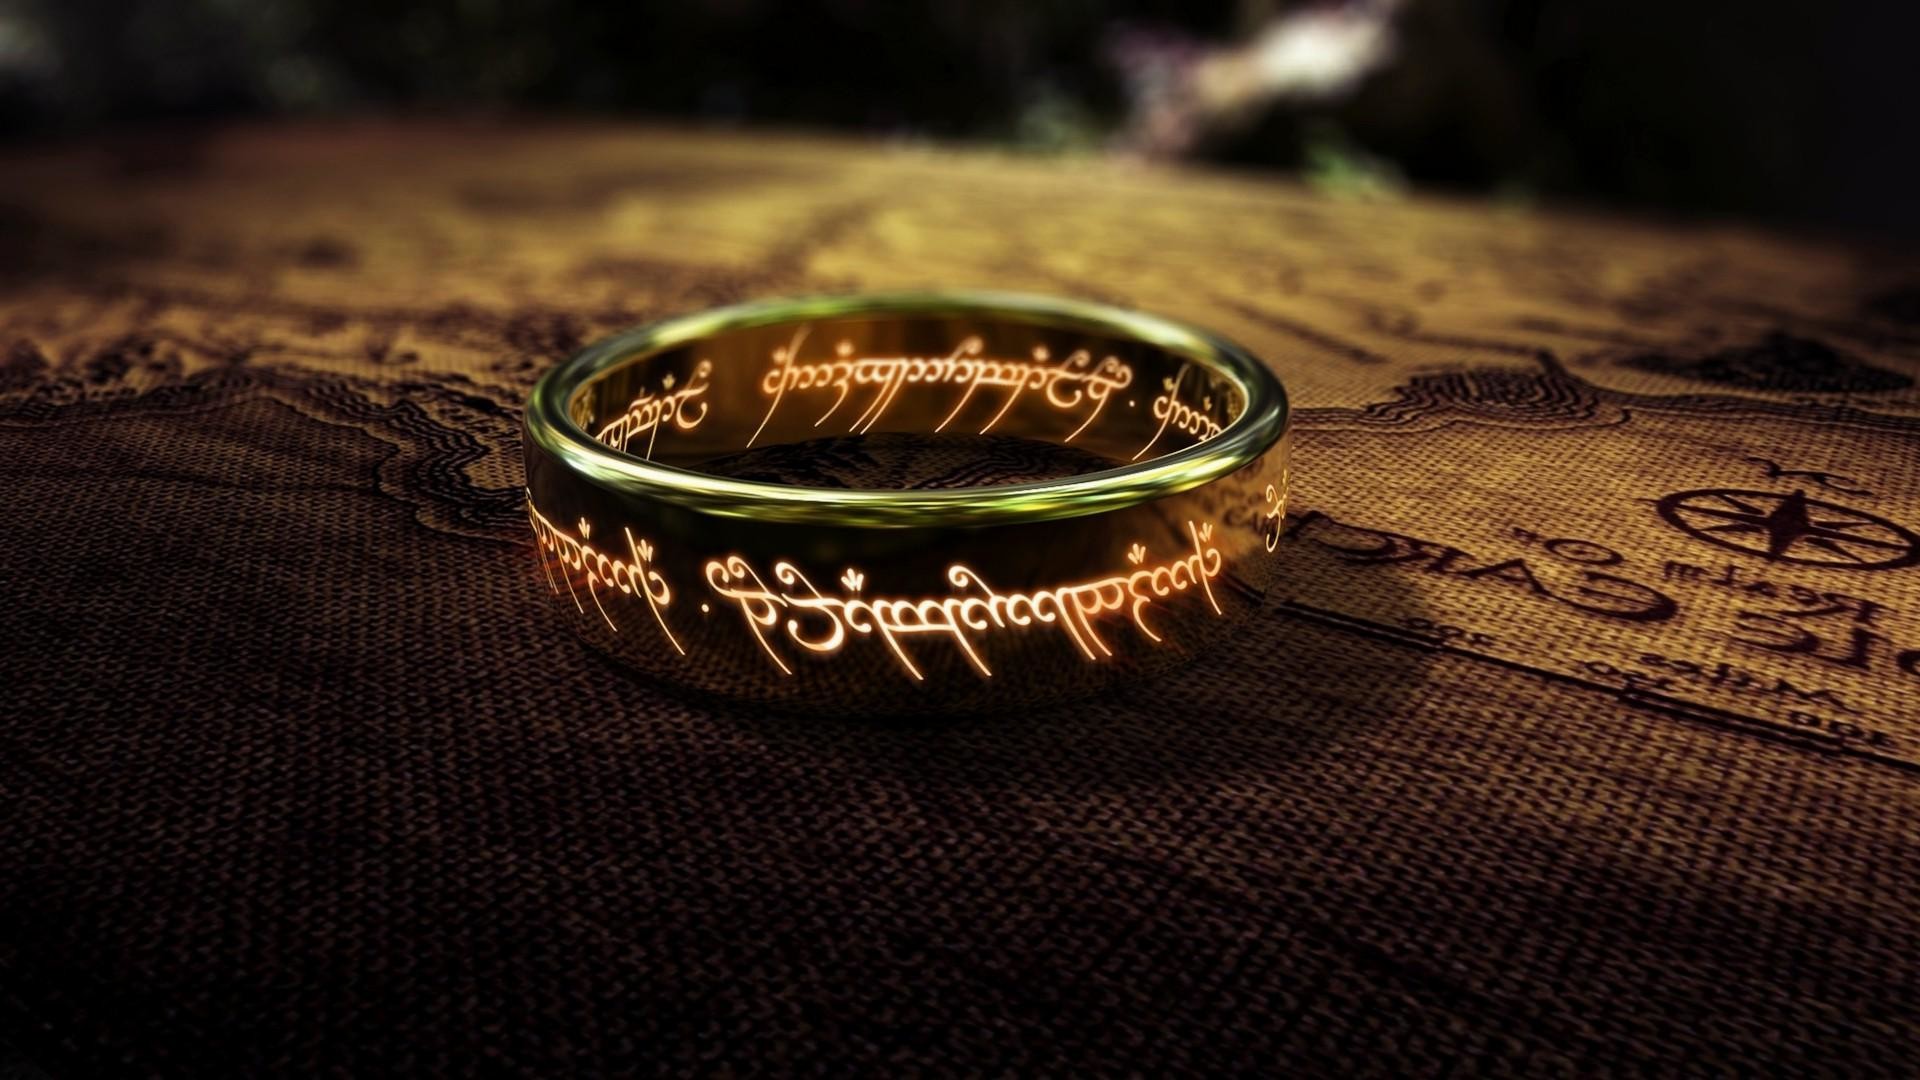 lord of the rings wallpaper hd,fashion accessory,jewellery,ring,body jewelry,metal